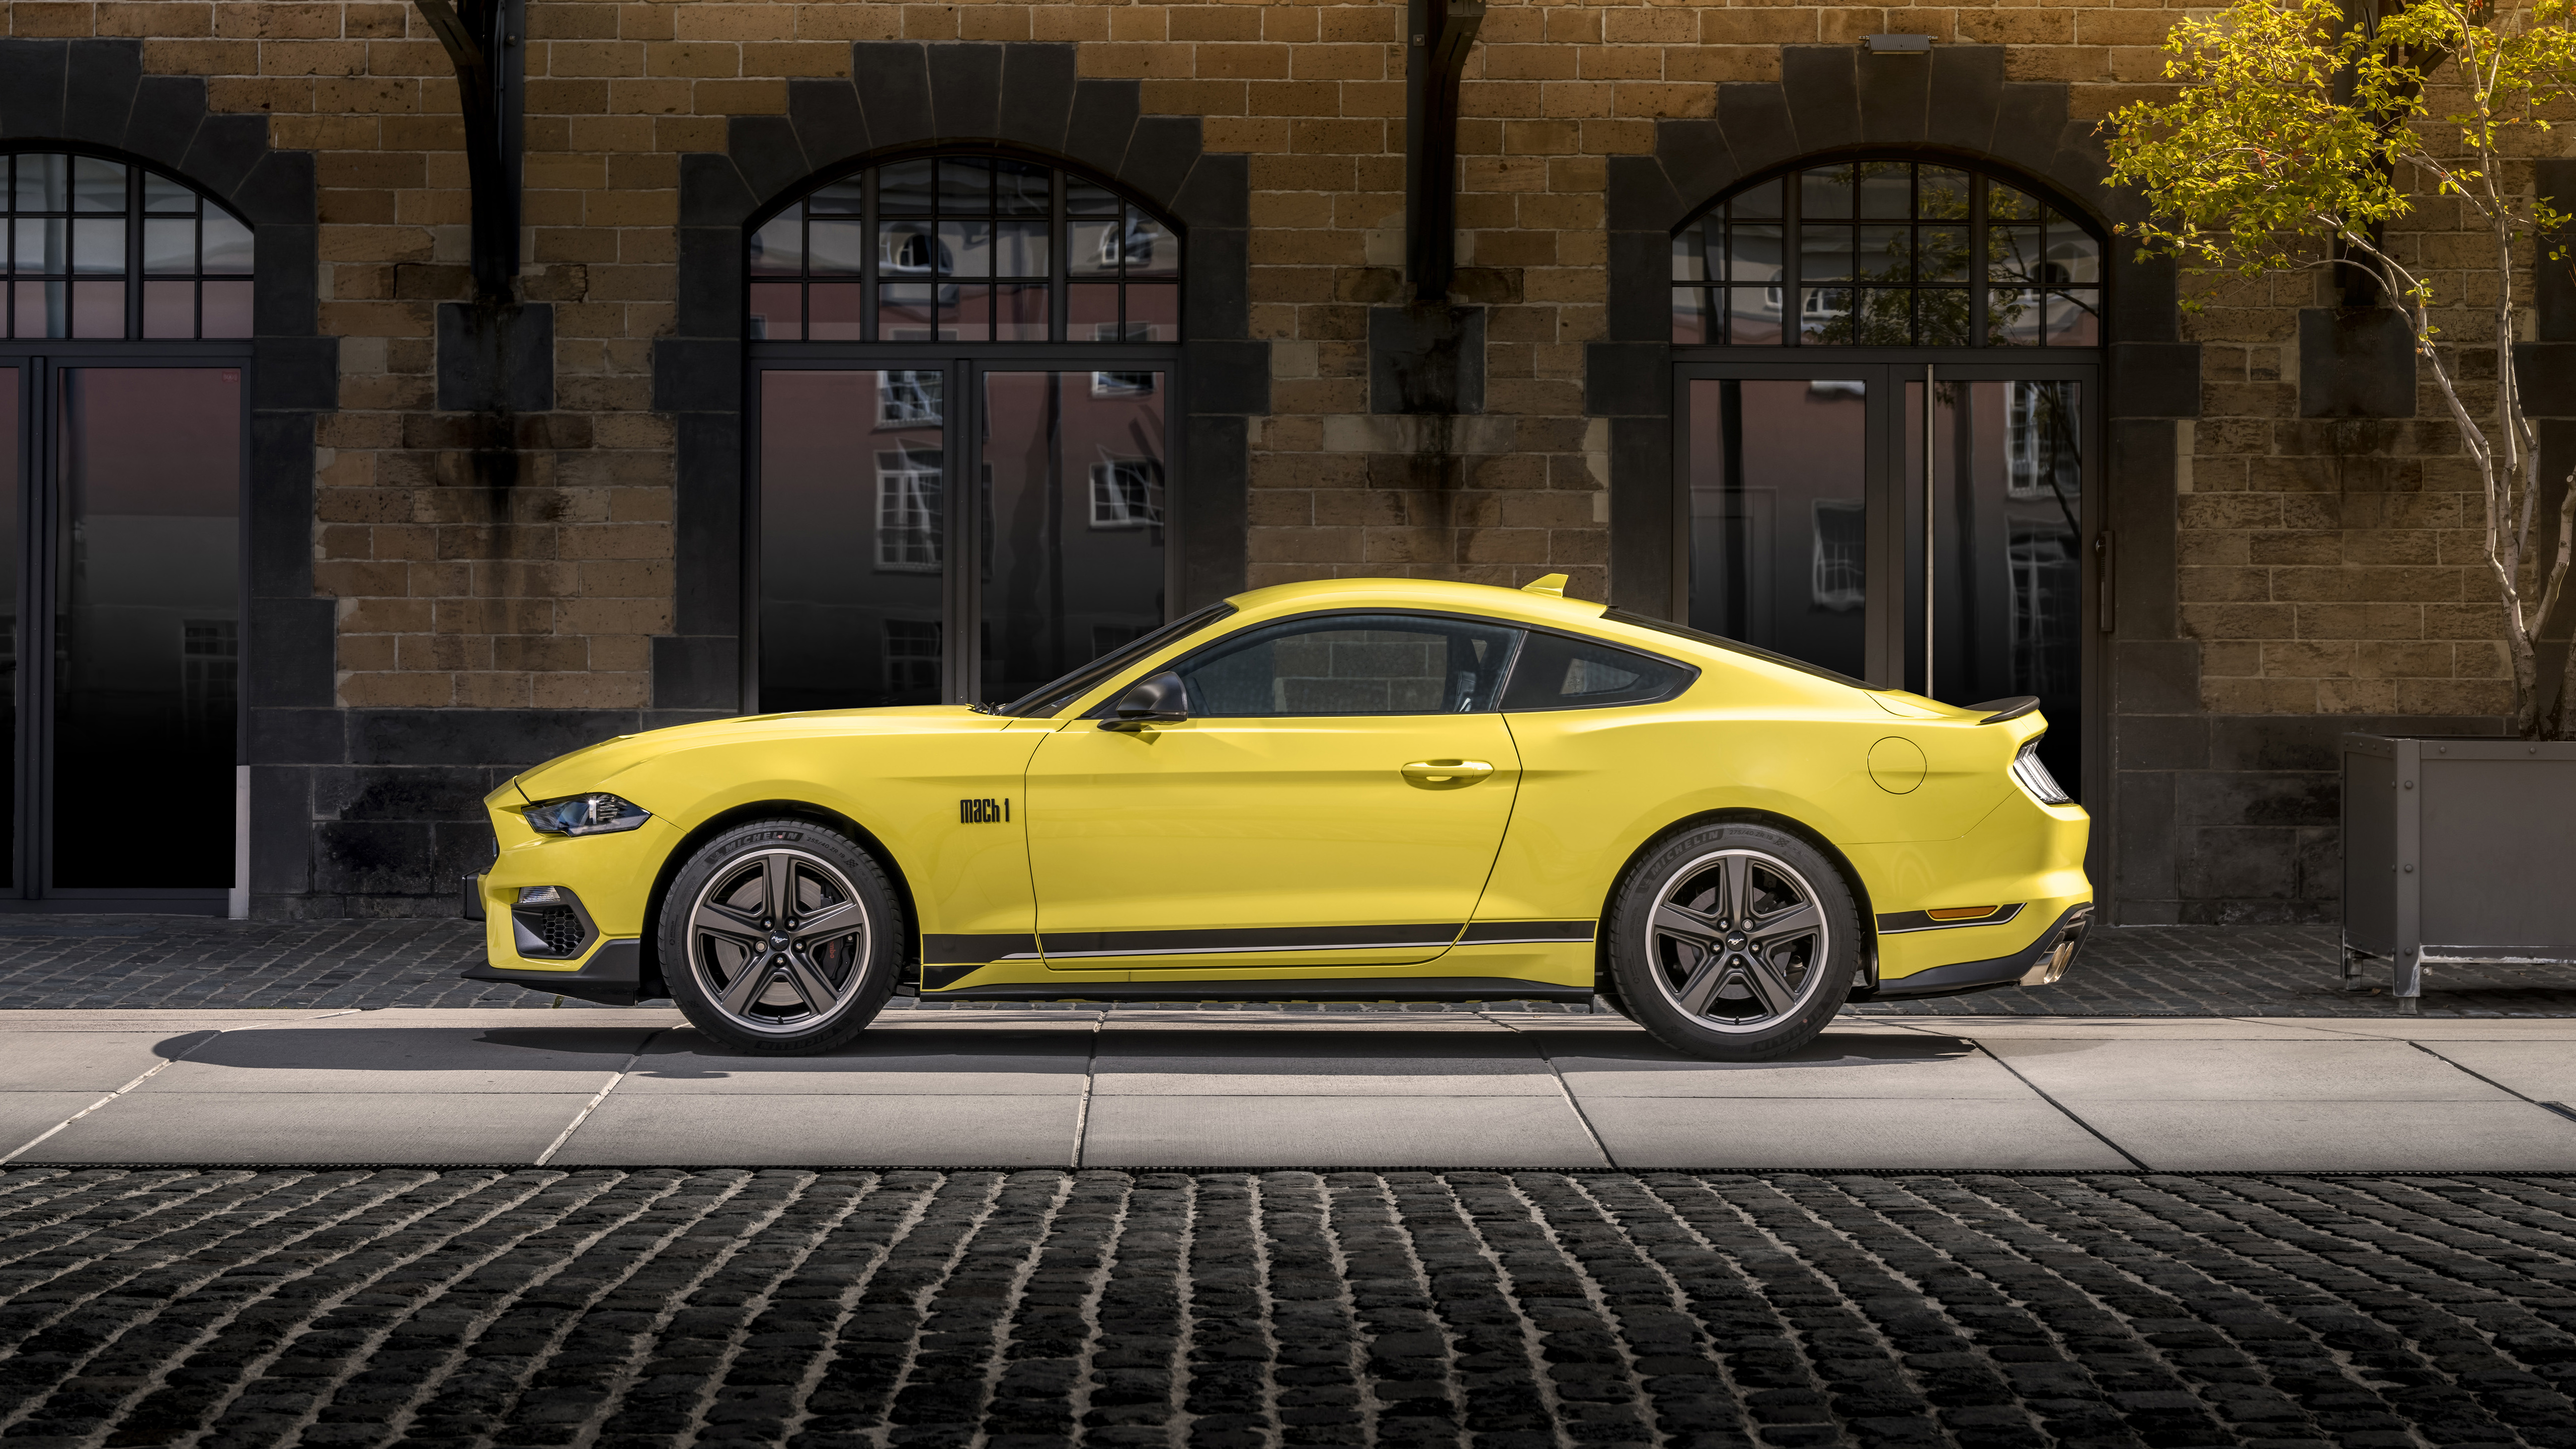 Ford Ford Mustang Mach 1 Car Vehicle Muscle Cars Yellow Cars 5120x2880